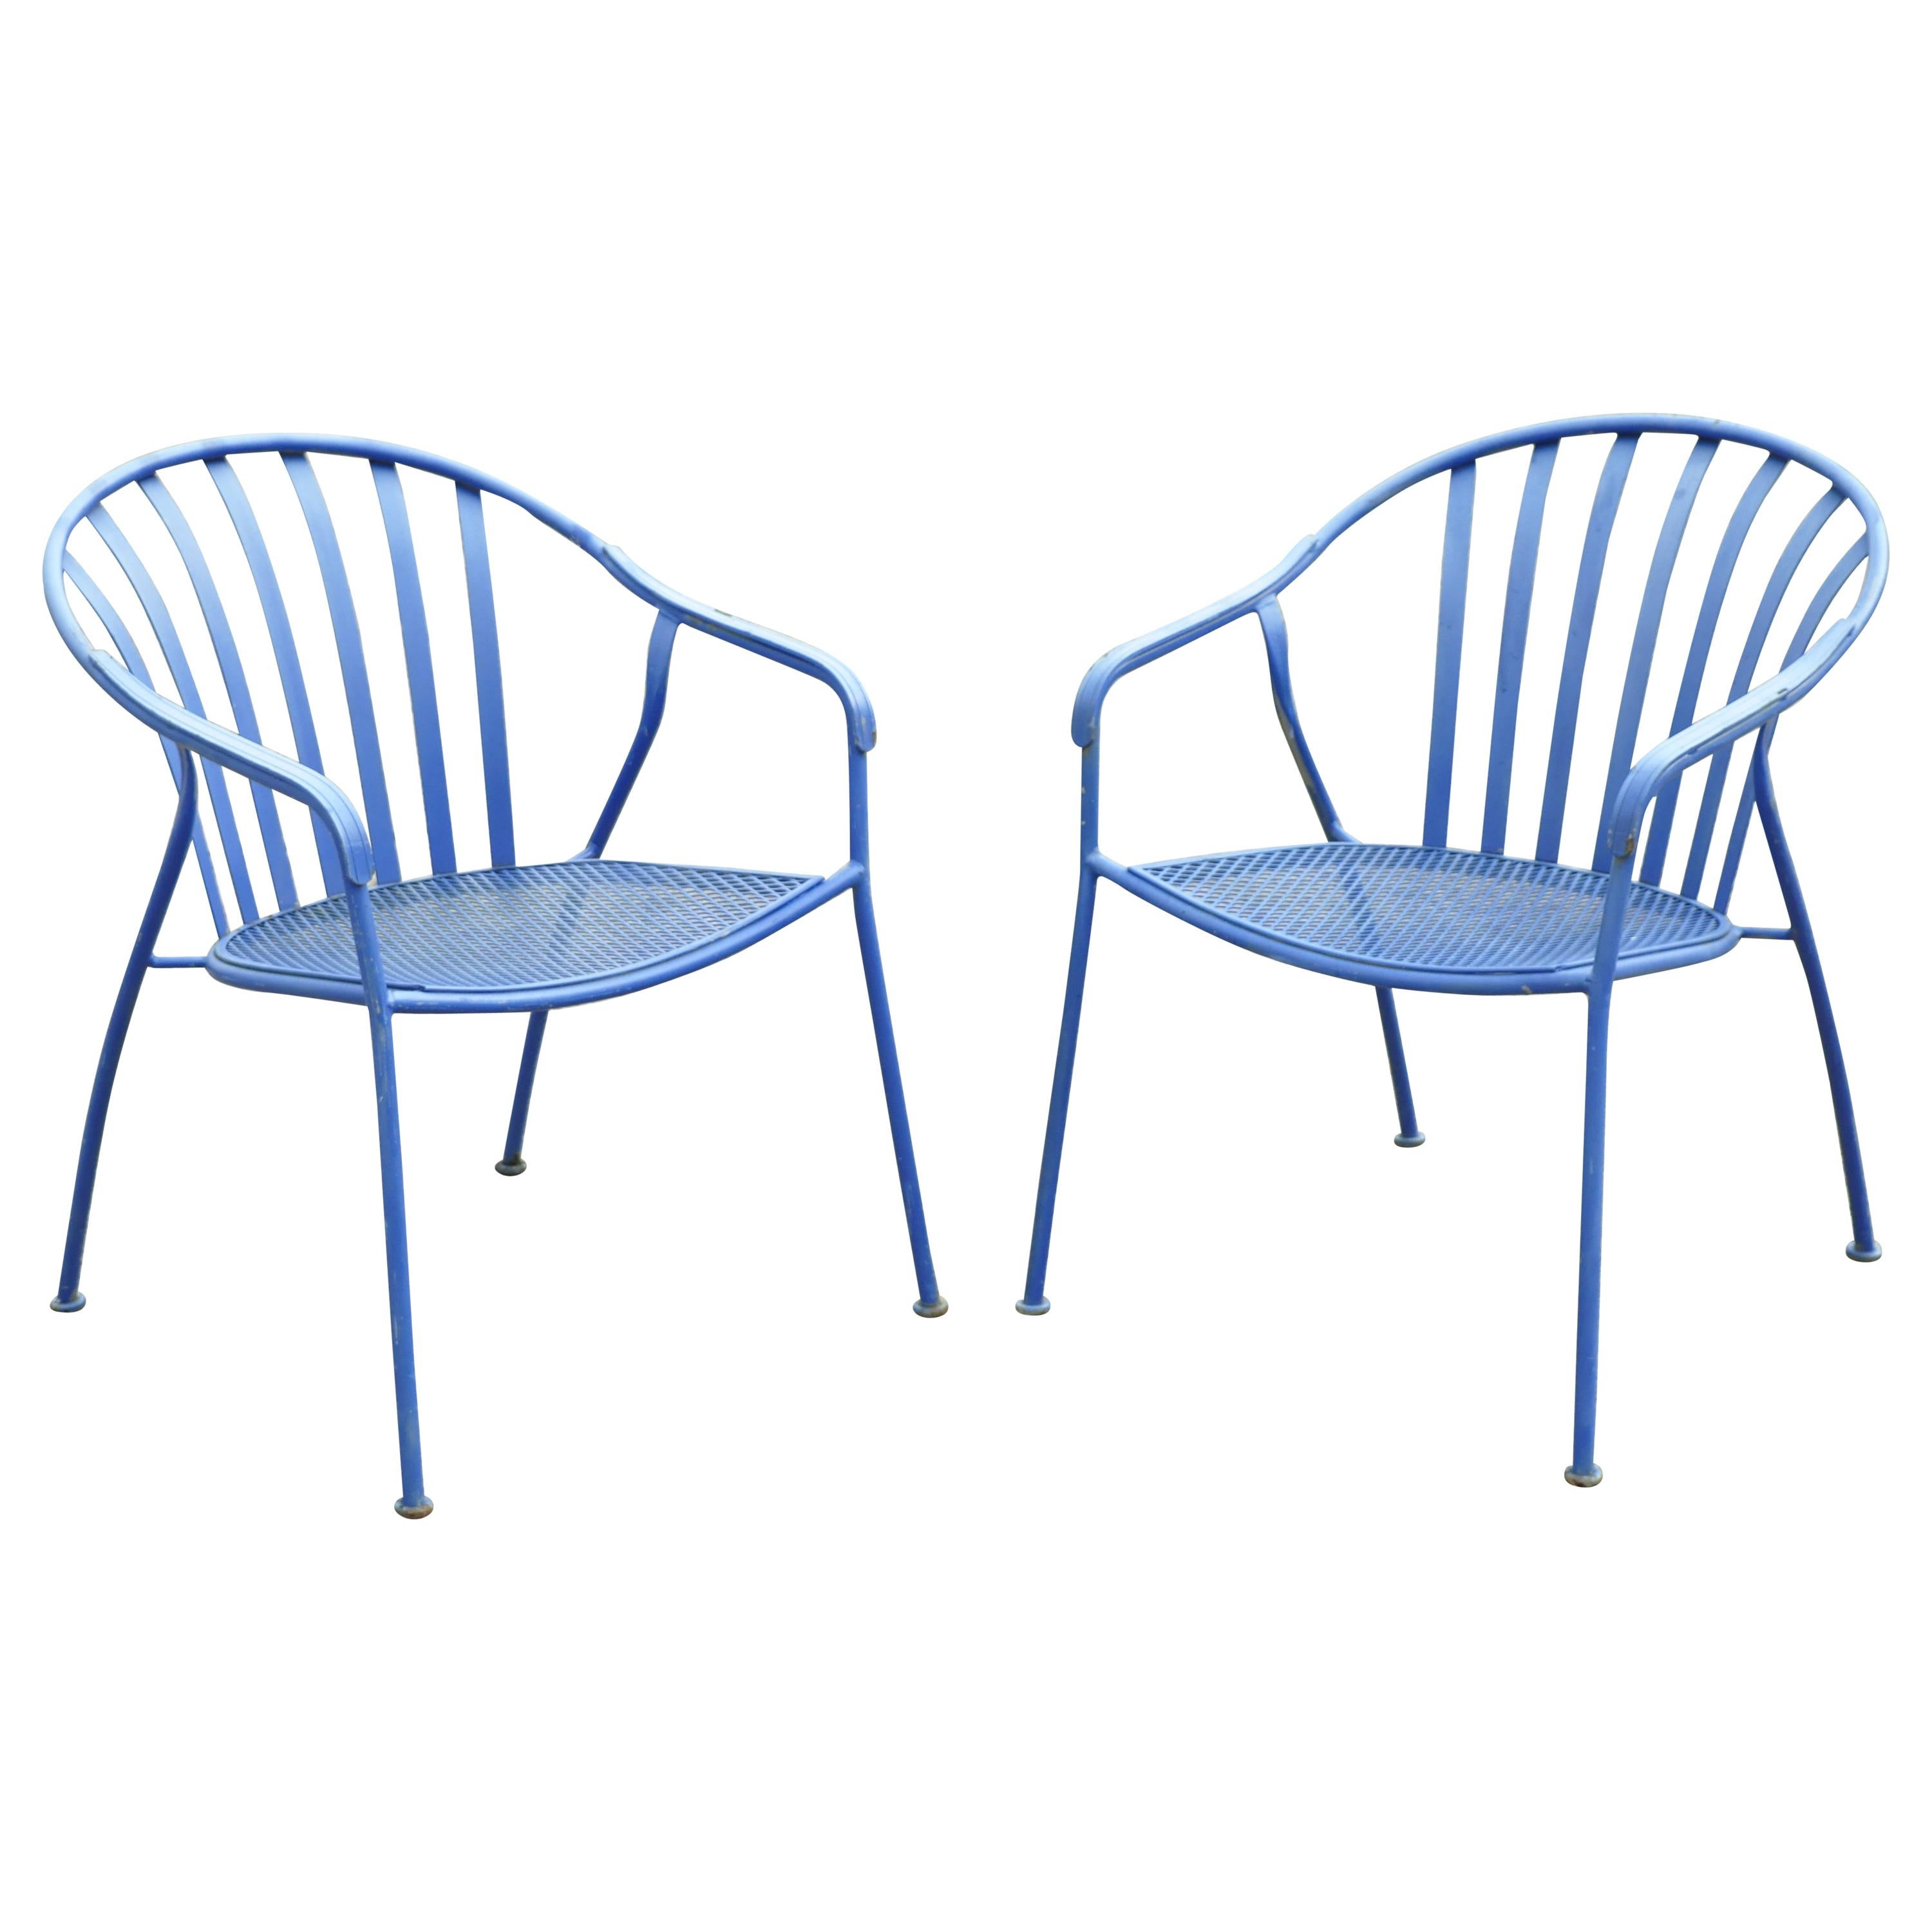 Woodard Valencia Barrel Back Stacking Iron Outdoor Patio Chairs, a Pair